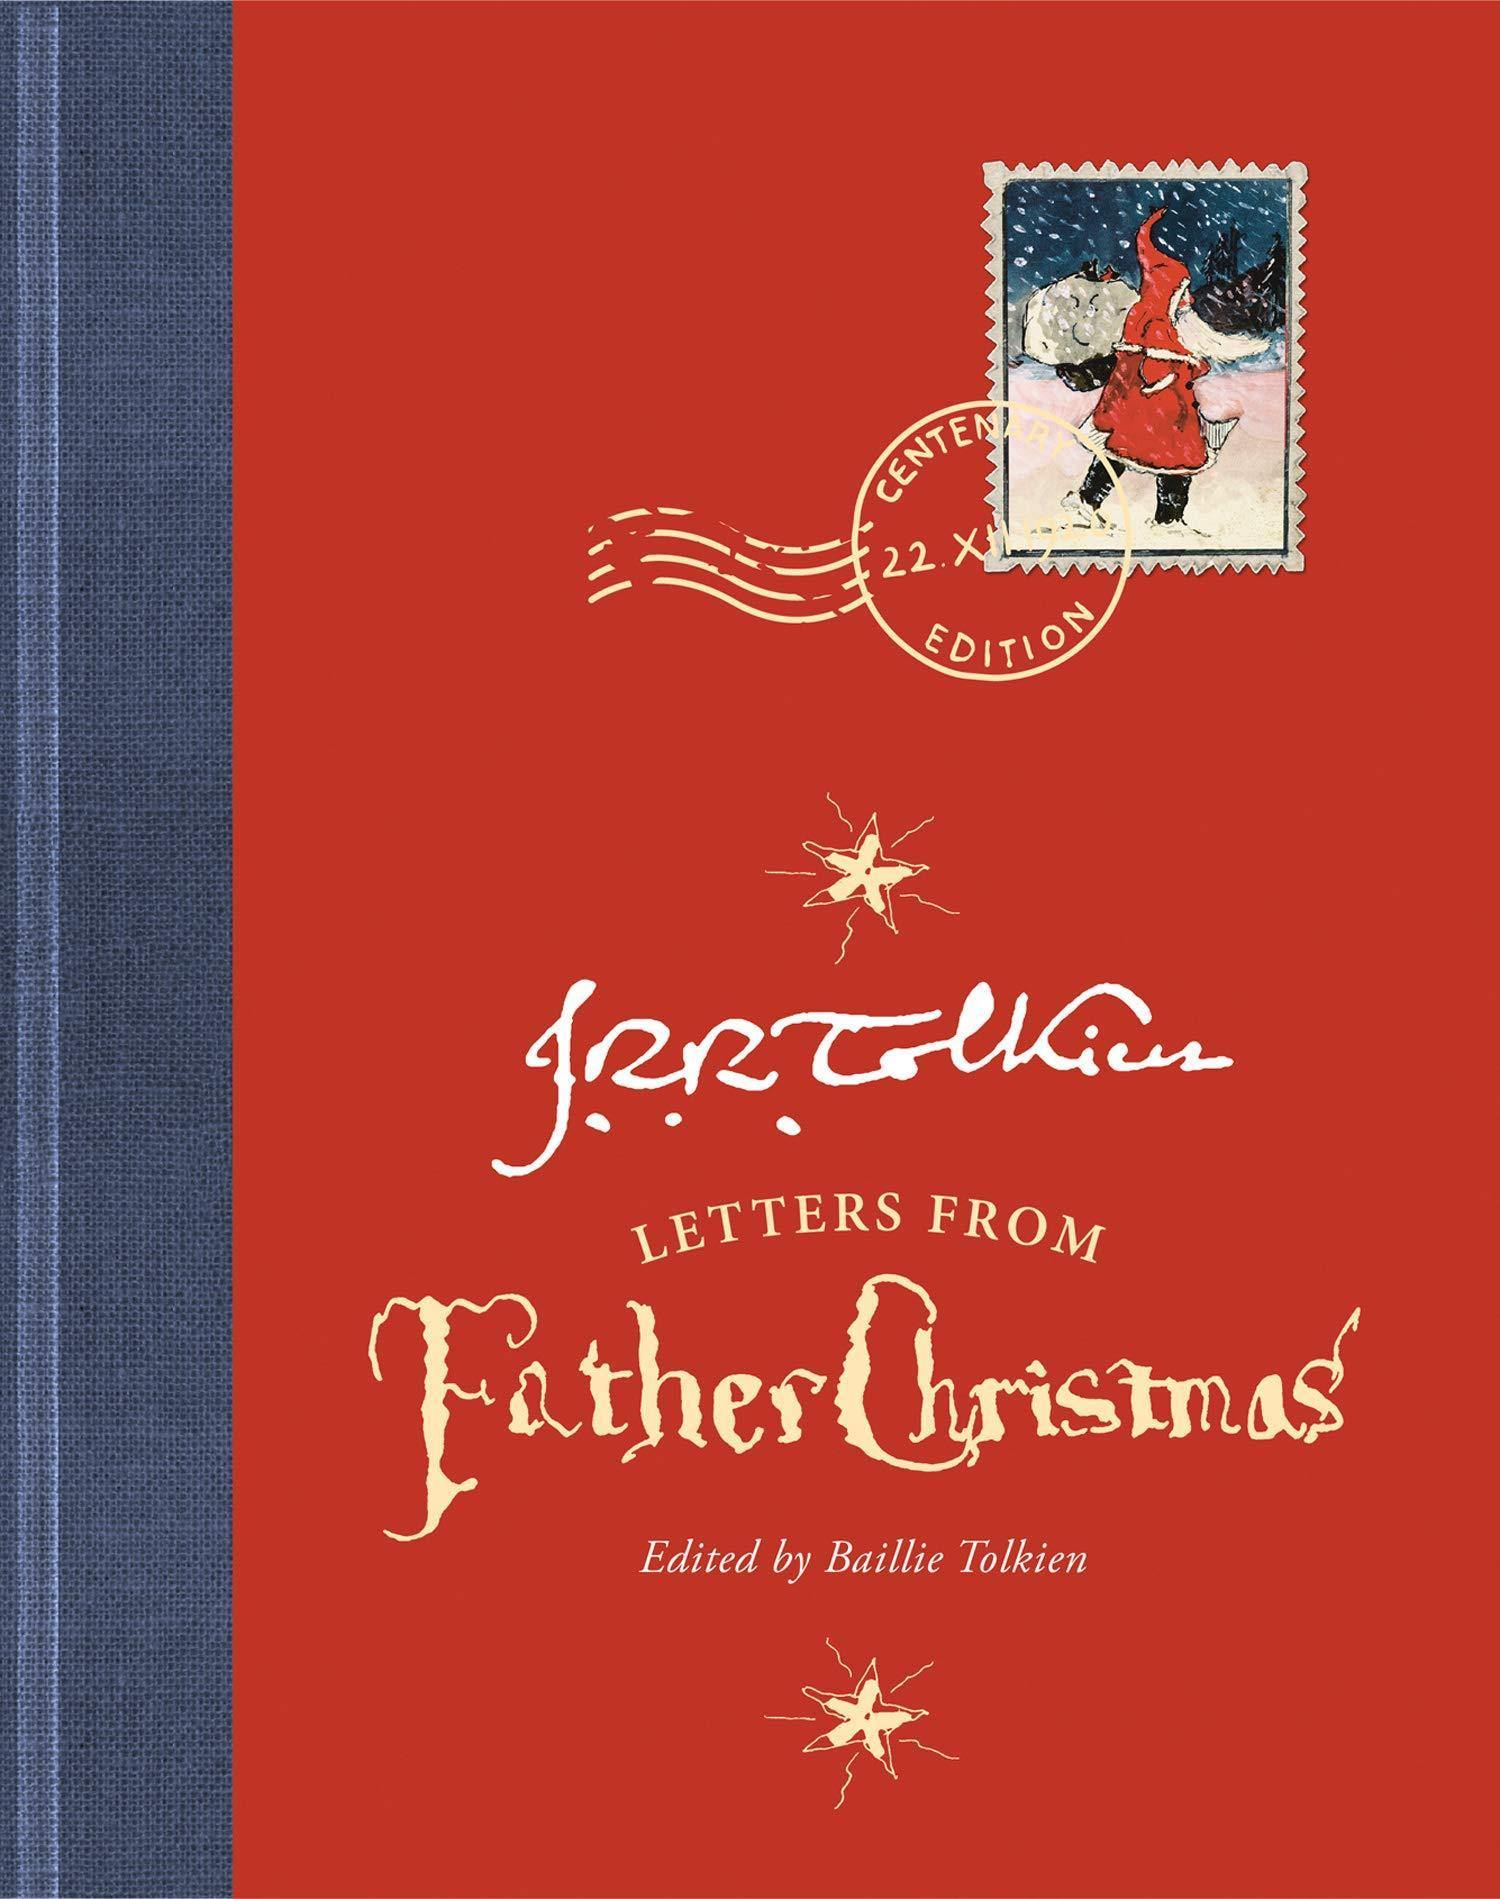 letters-from-father-christmas-centenary-edition